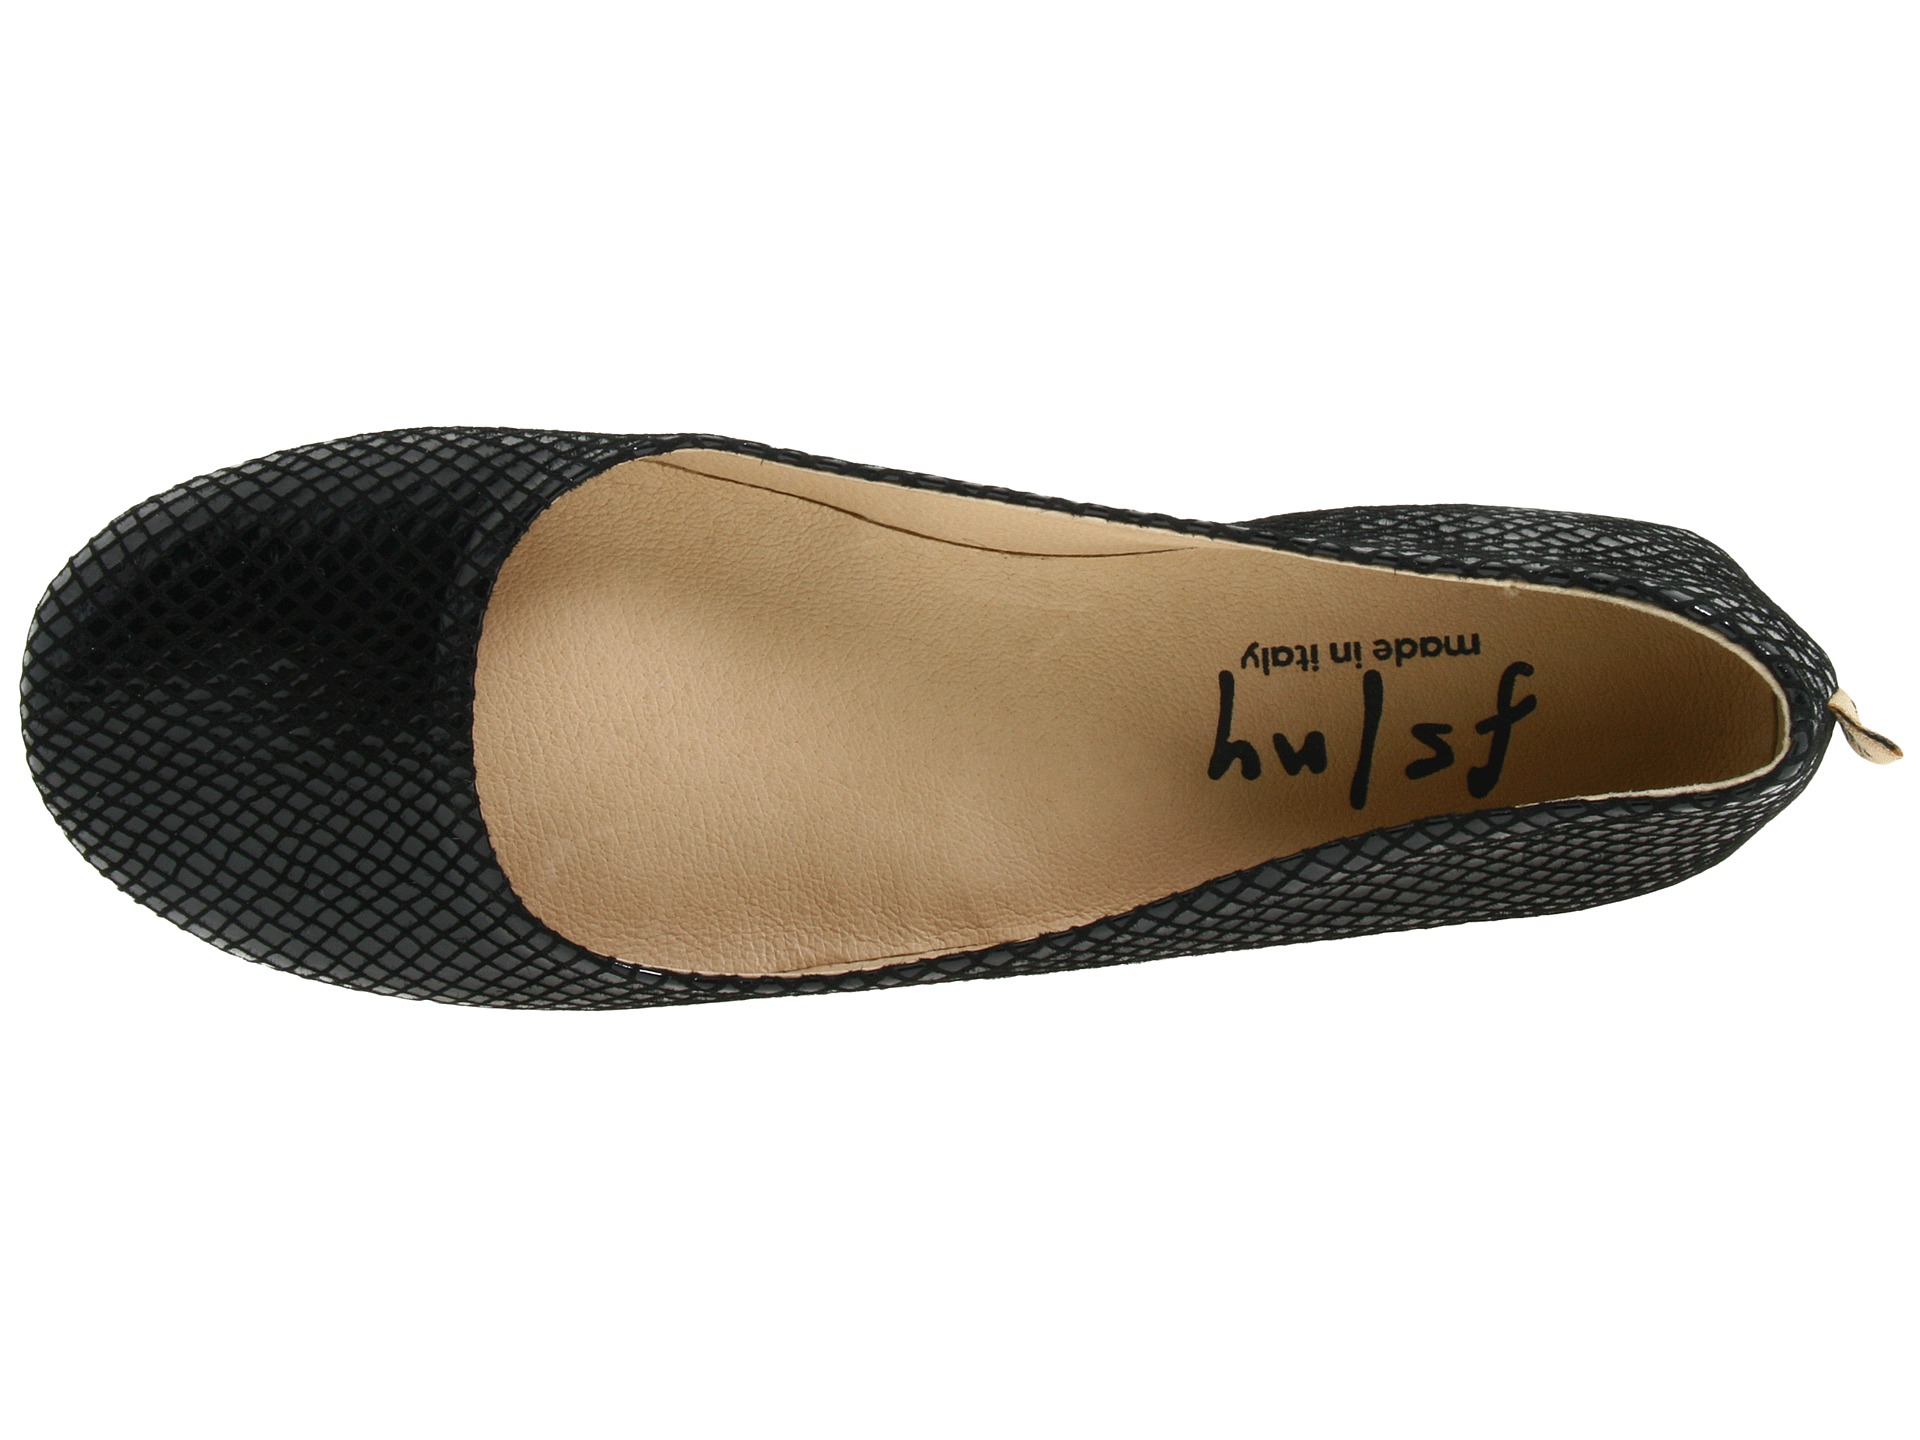 French Sole Zeppa at Zappos.com